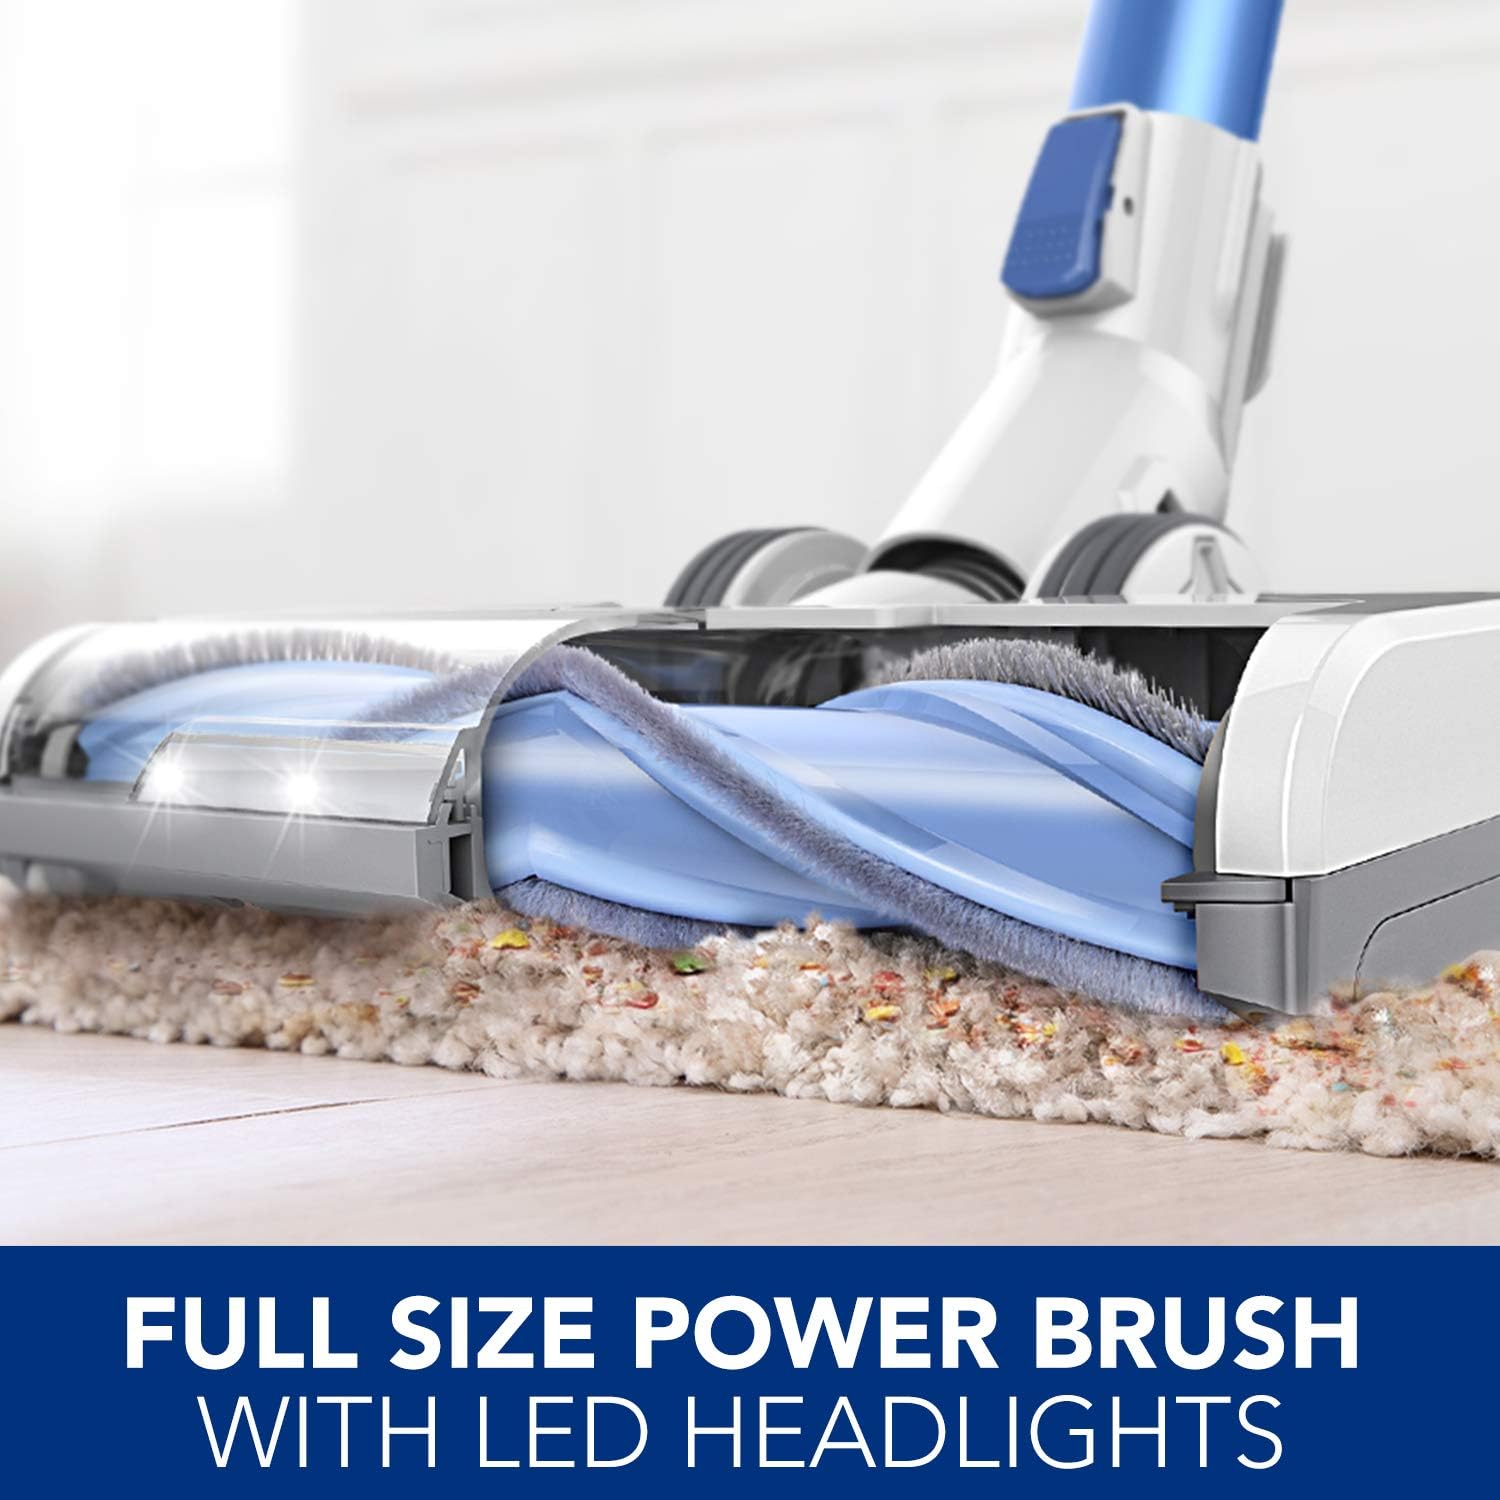 Tineco A10 Hero Cordless Stick/Handheld Vacuum Cleaner, Super Lightweight with Powerful Suction for Carpet, Space Blue